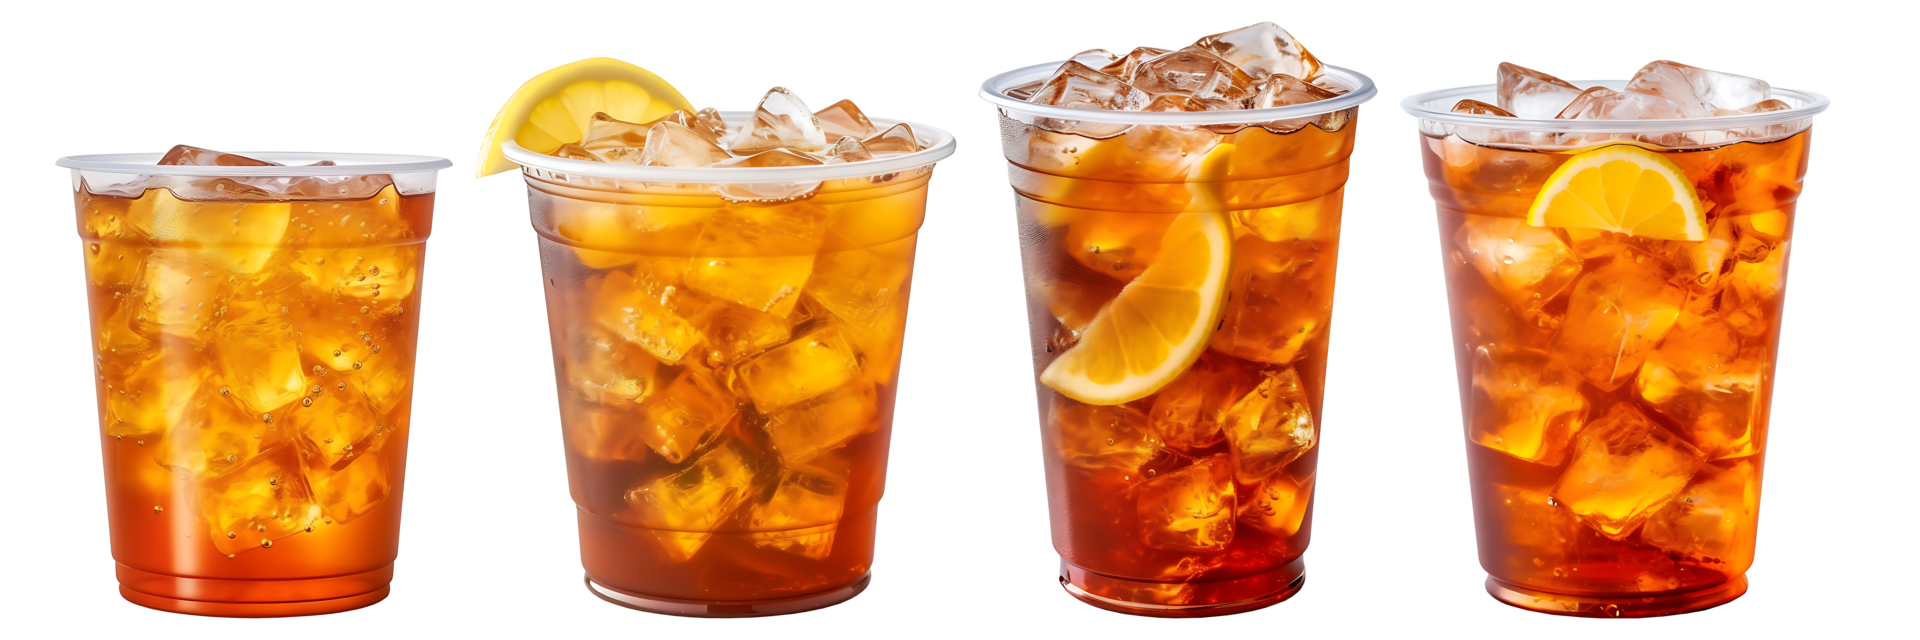 Ice Tea Cup Photos and Images & Pictures